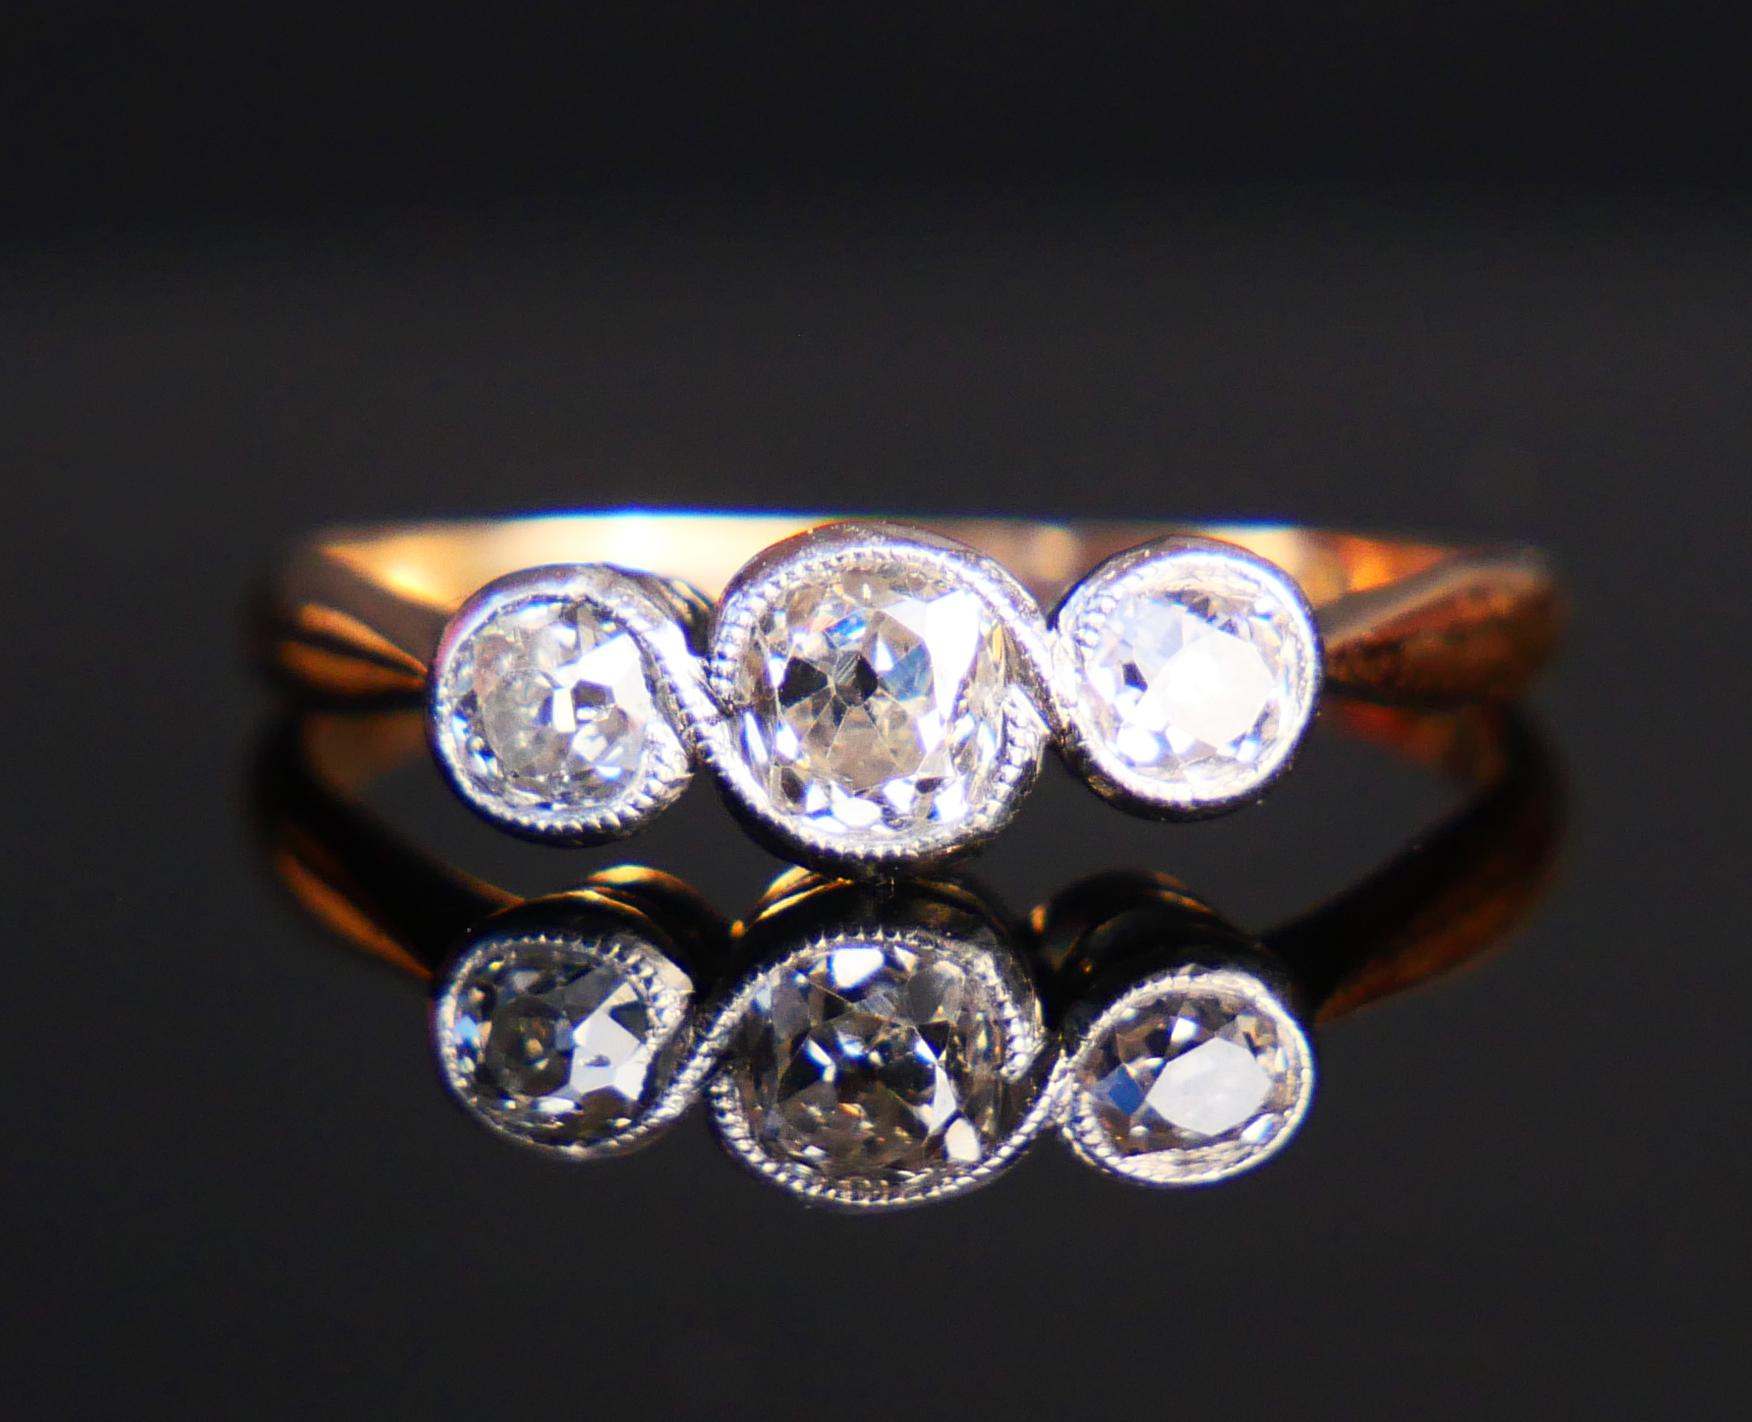 Nice Finish Three Stones cluster ring made in 1932 . Combination of 18K Orange Gold, White Gold /or Platinum and three natural Diamonds of old European Diamond cut, hand - made cut.
Beautiful and still very sturdy and damage - resistant ergonomic